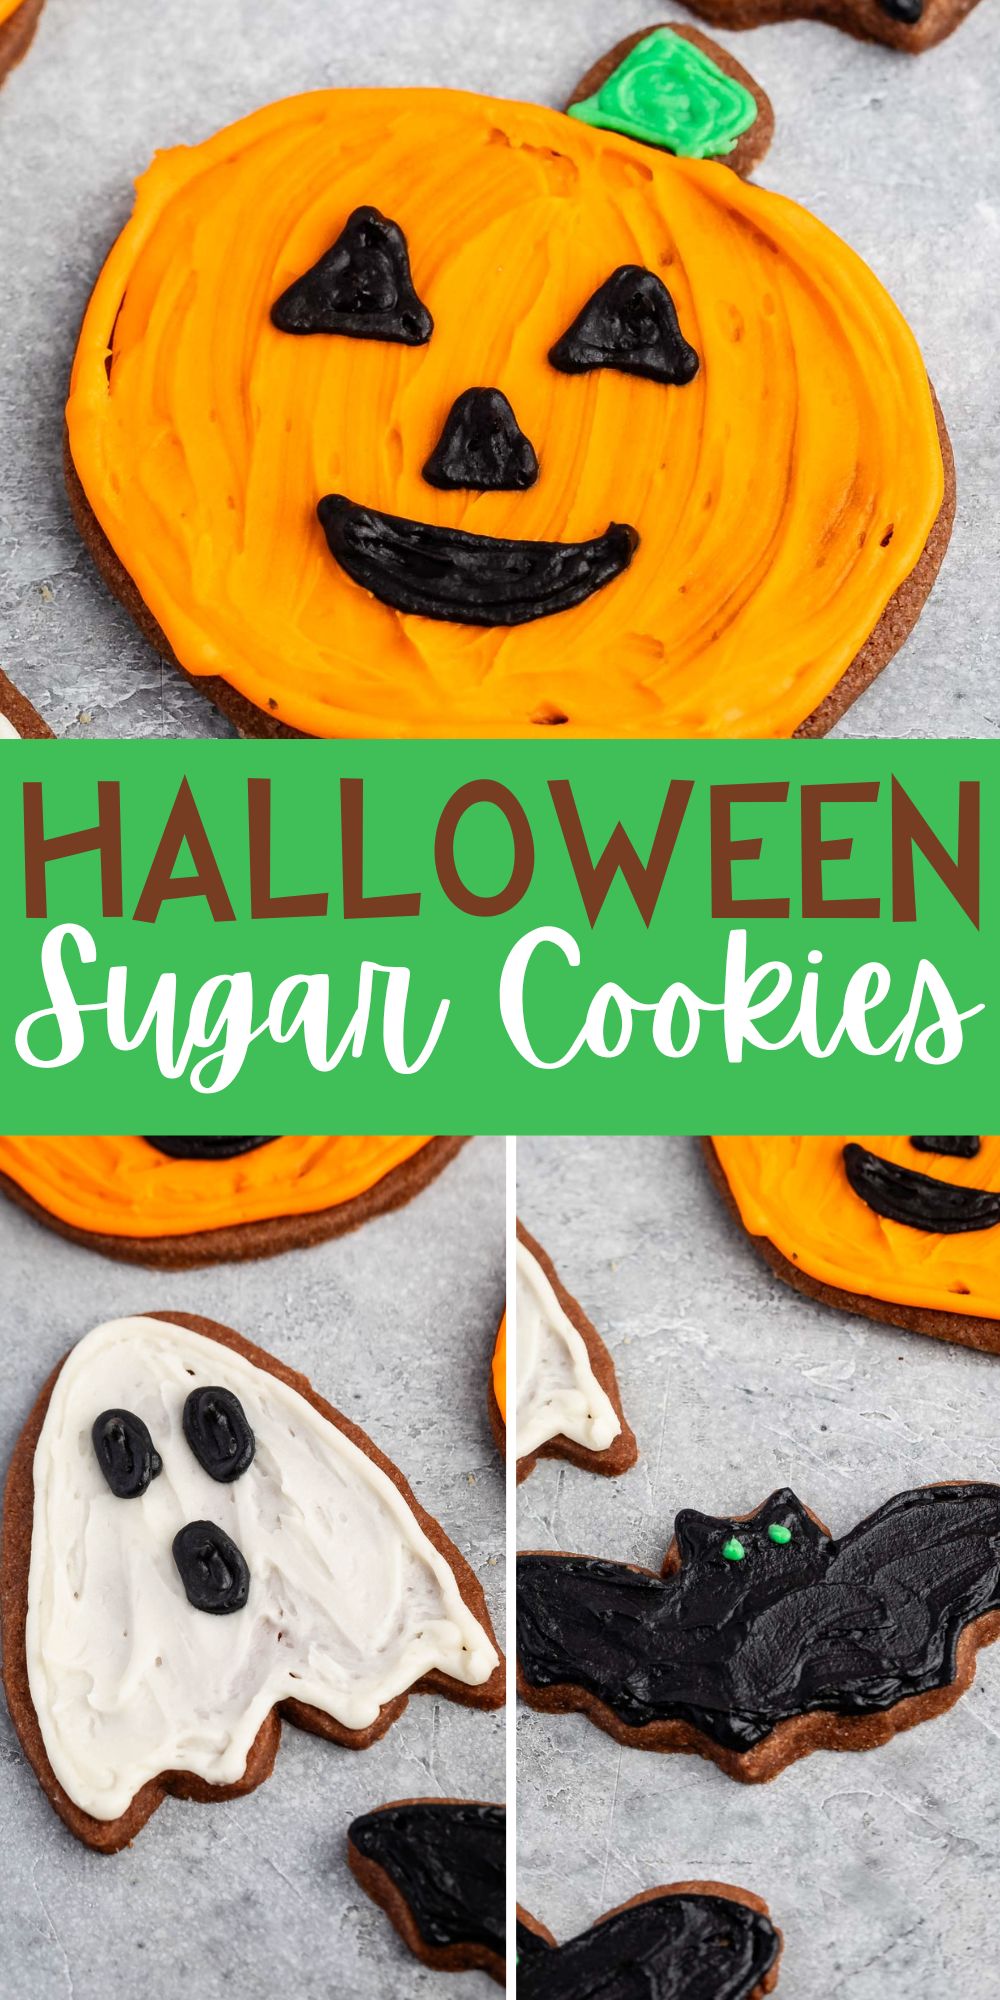 three photos of sugar cookies shaped like halloween characters and frosted with orange, white and black with words on the image.